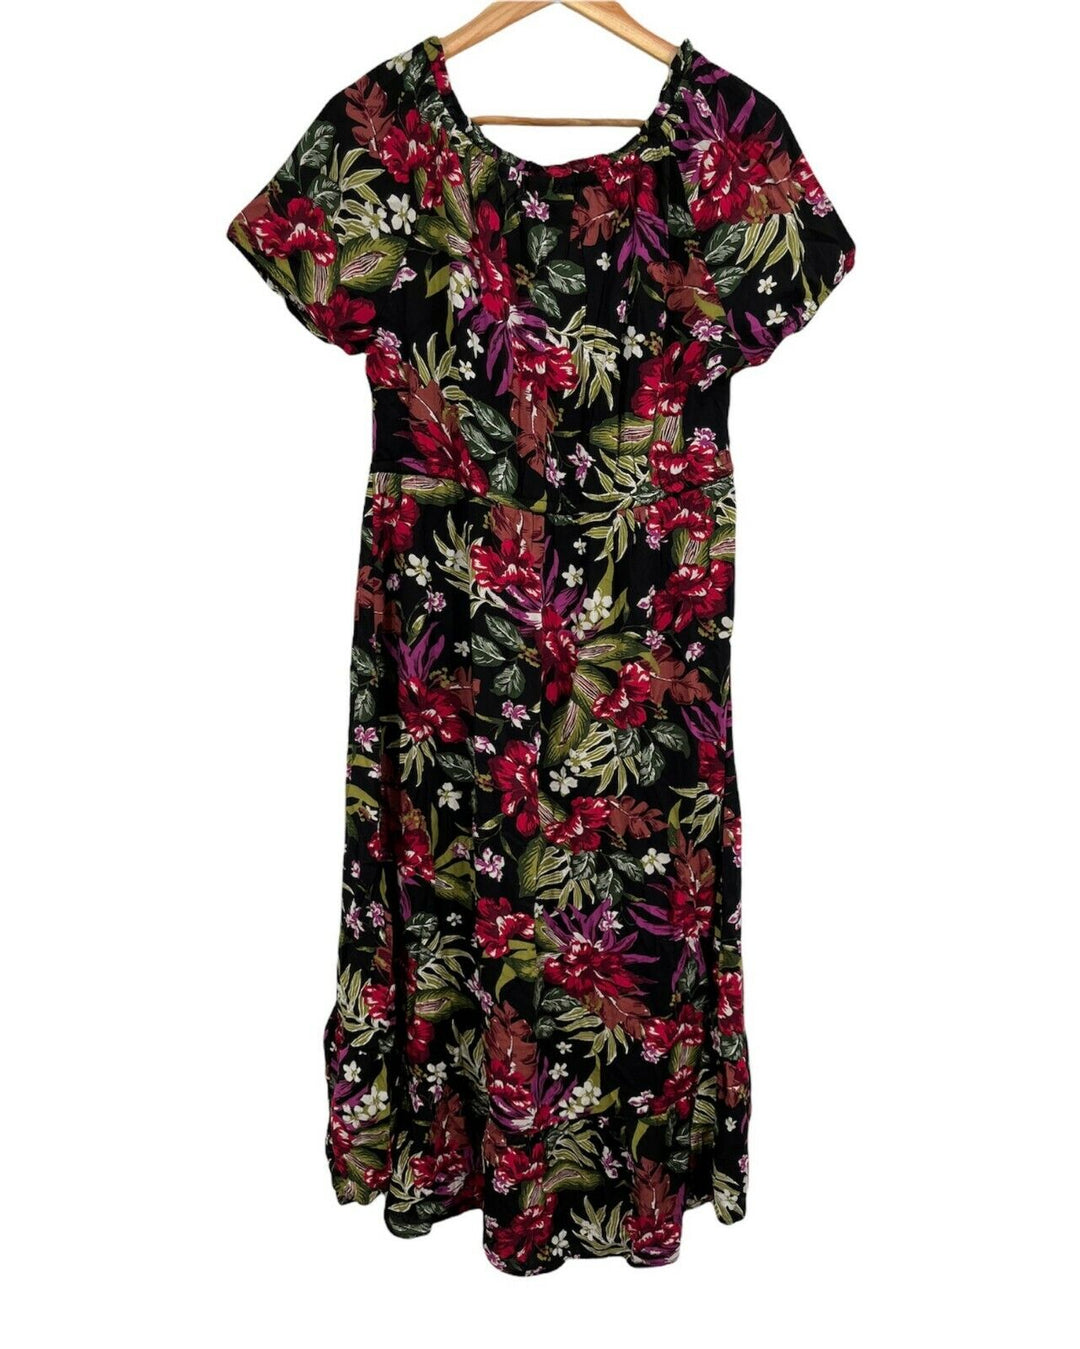 Women's Dress Floral Off The Shoulder High Low Tie Mid